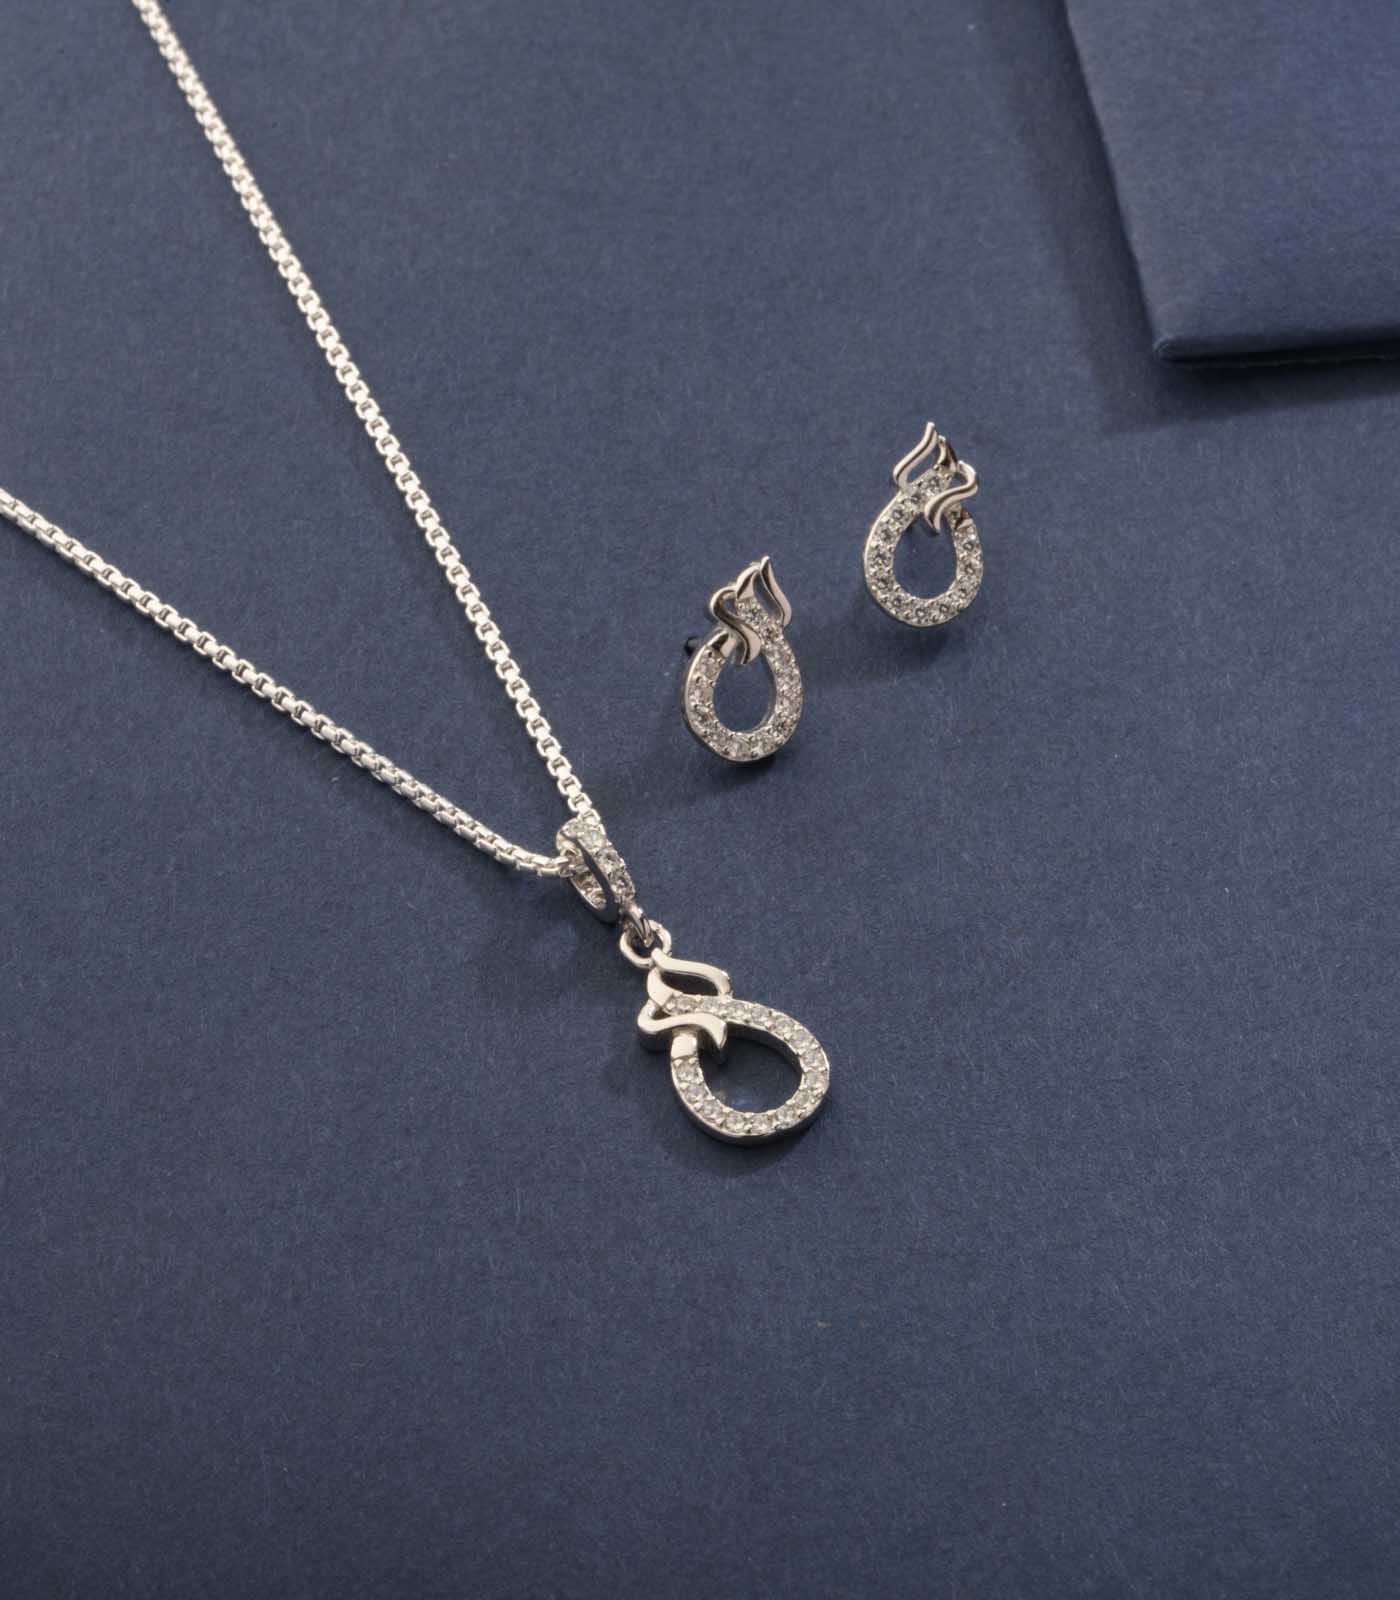 Luxurious Silver And Shiny Gems Pendant Set (Silver)